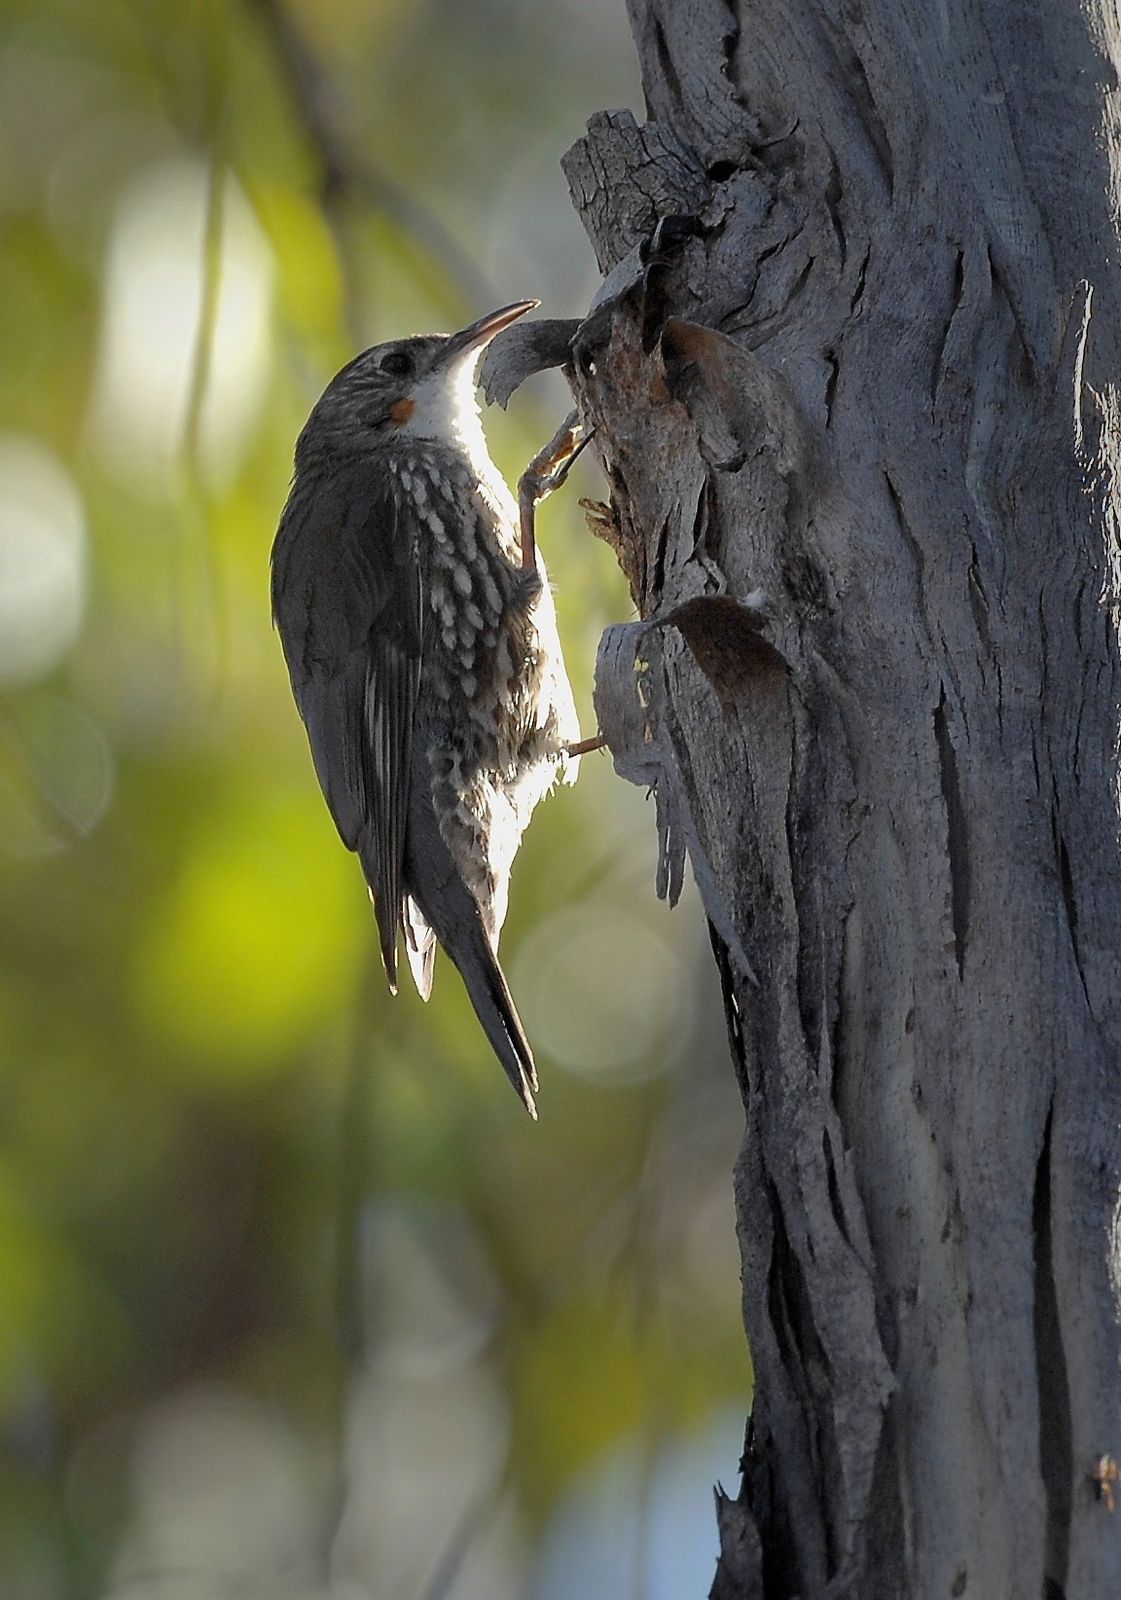 White-fronted Treecreeper in action in the last moments of sunlight.